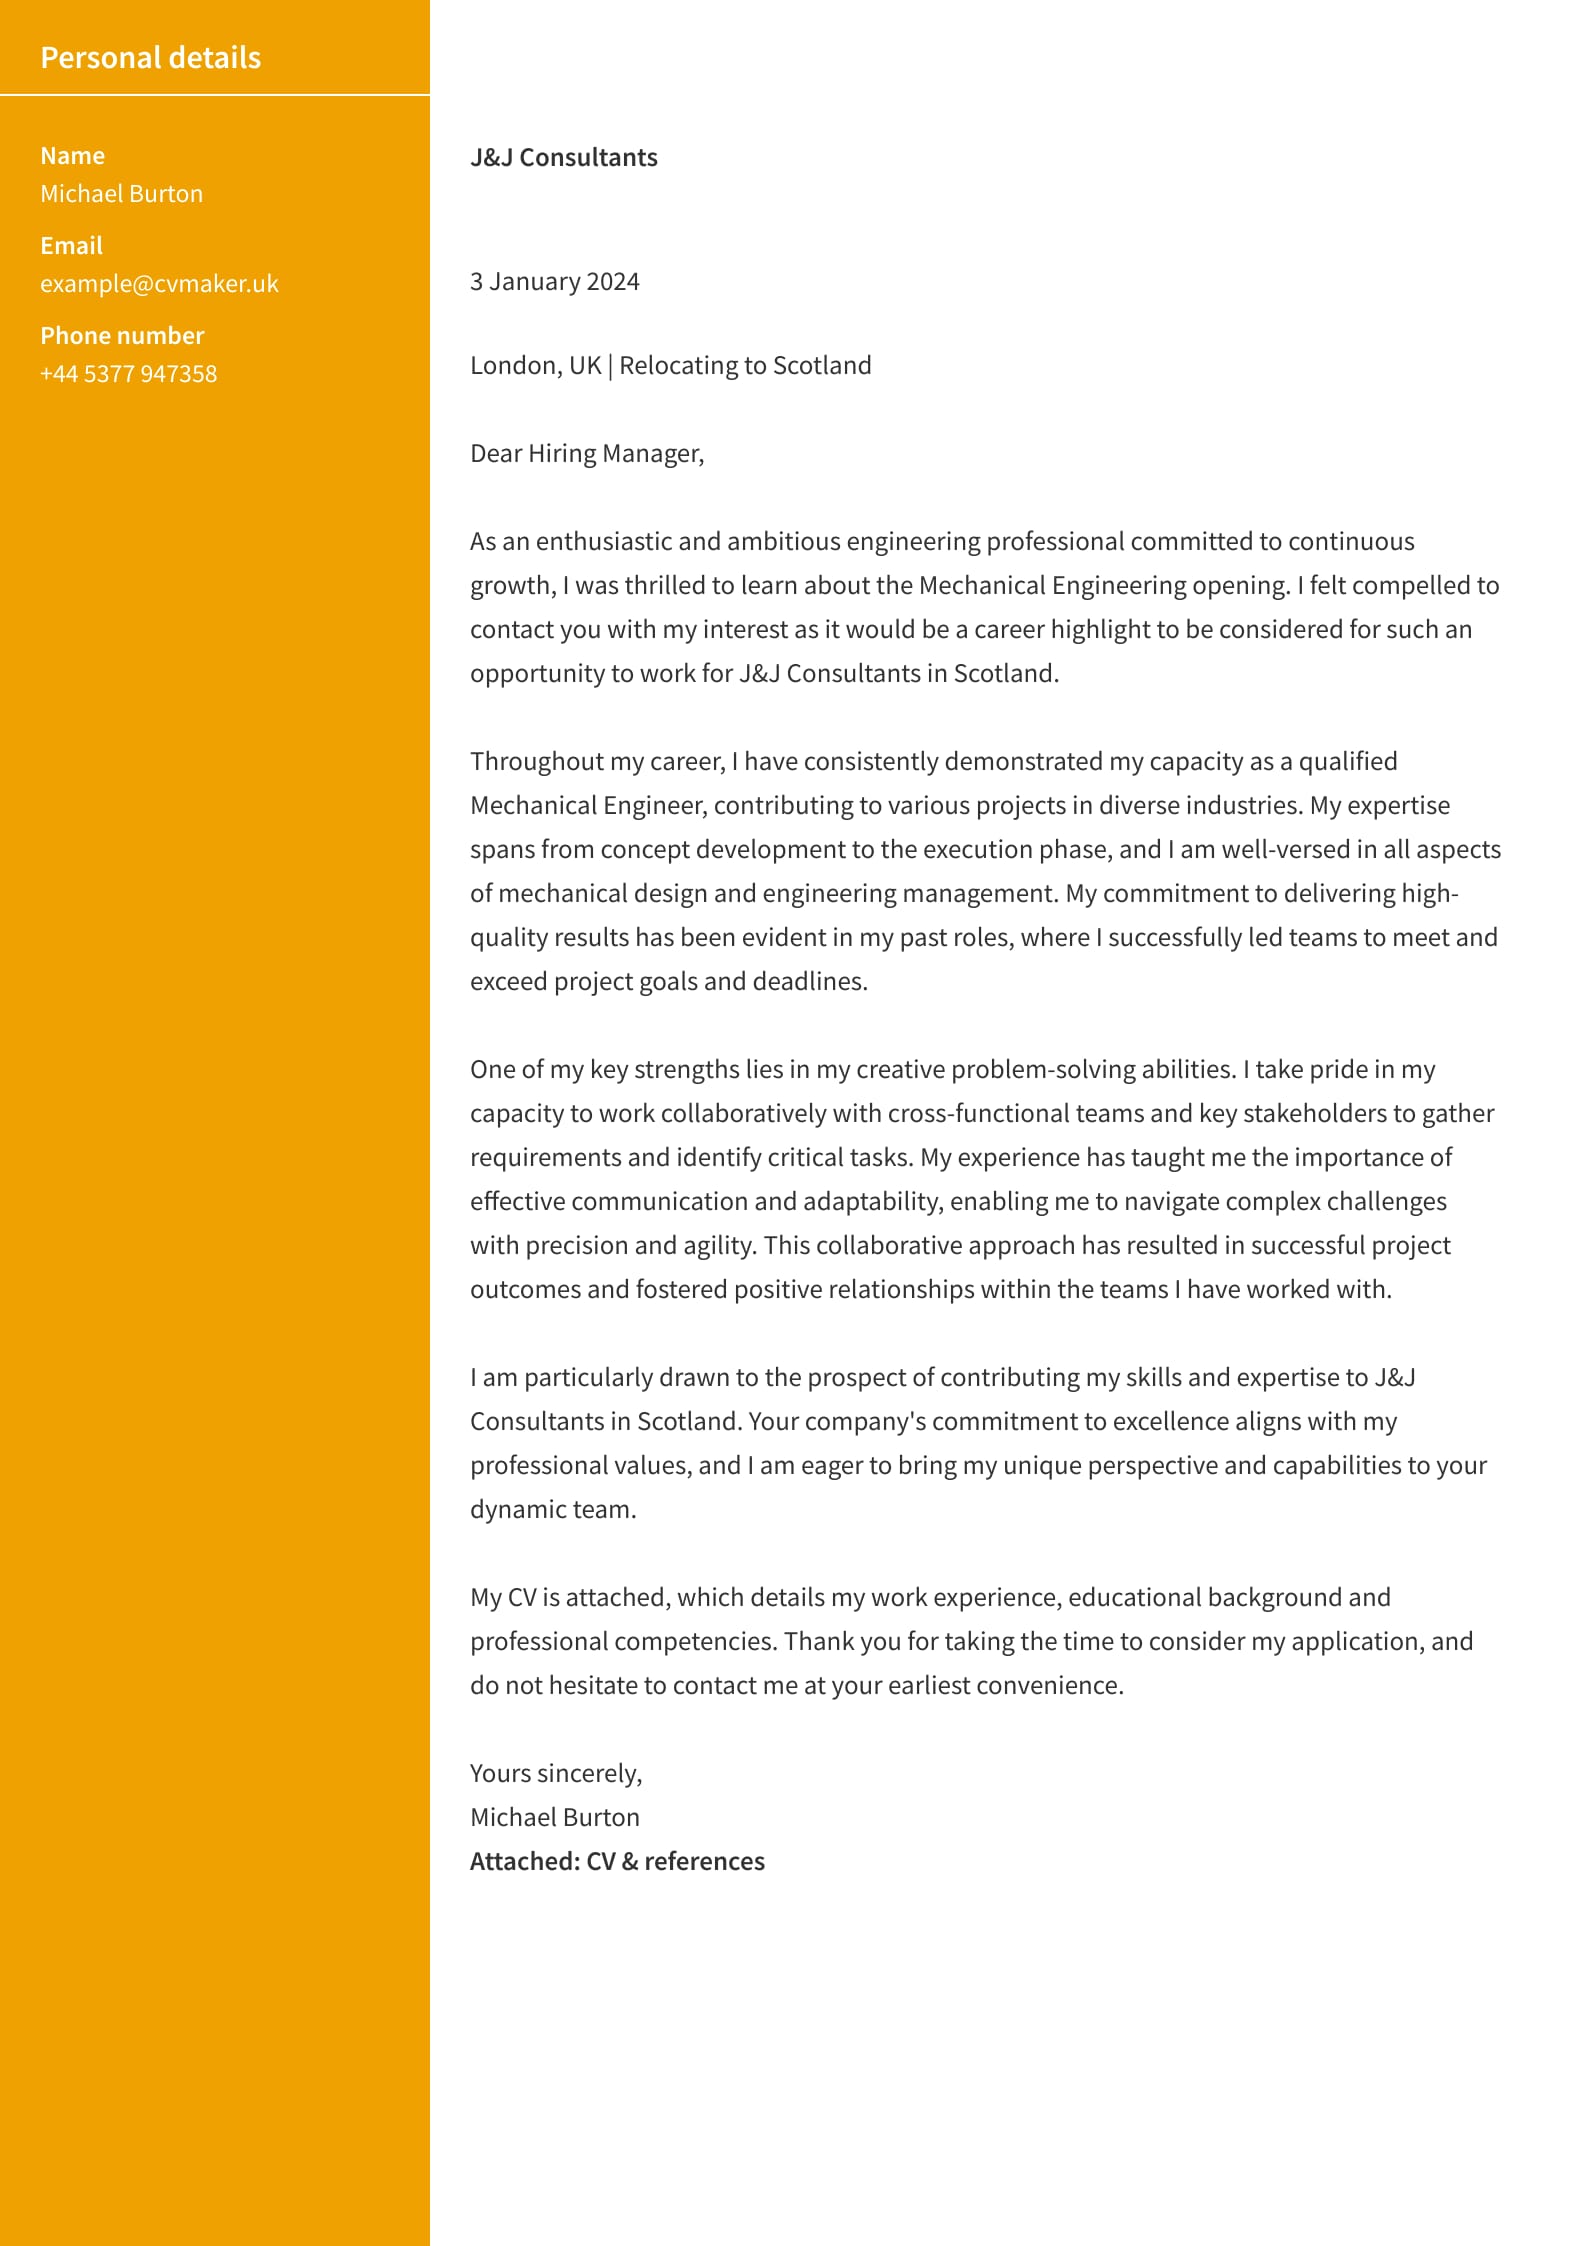 Cover Letter Example - Engineering - Stanford template 